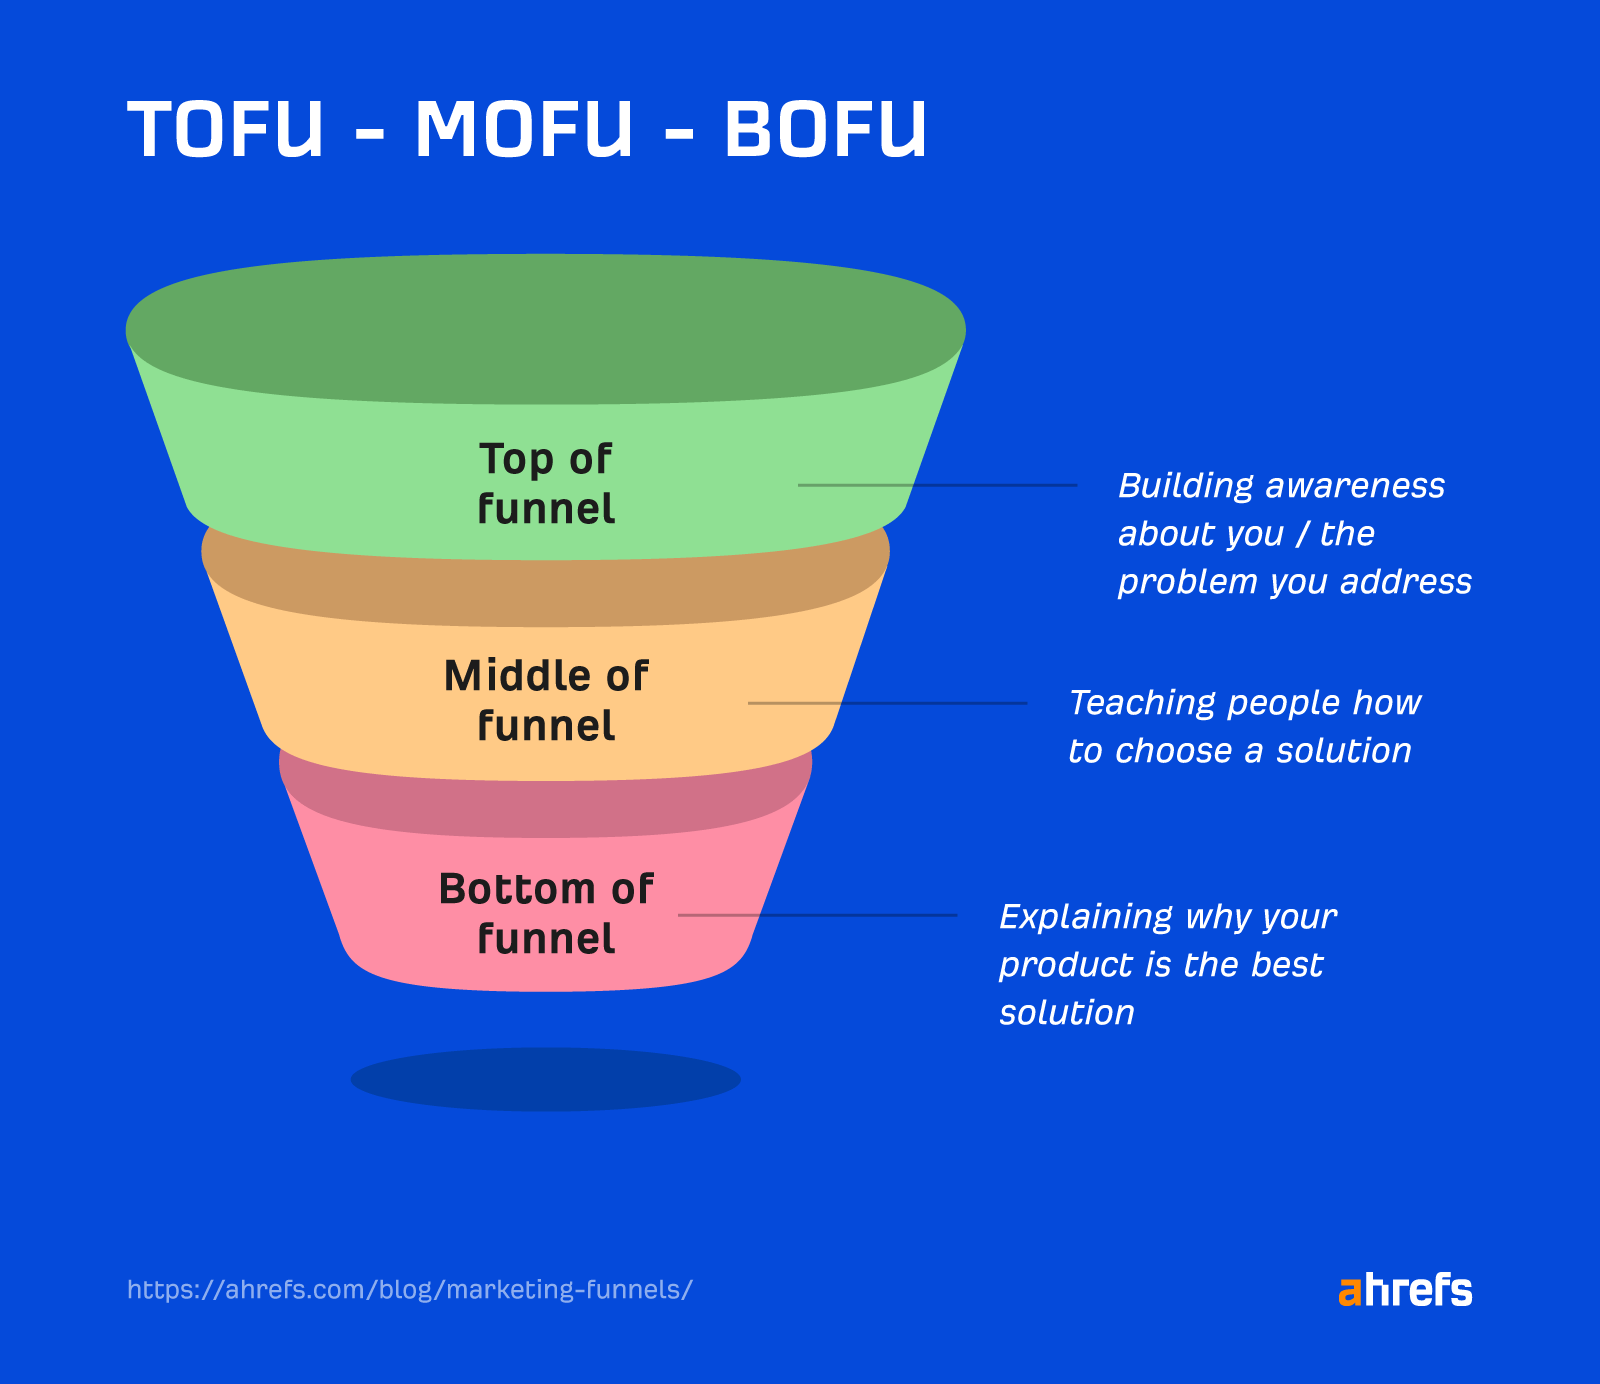 The 3 stages of the marketing funnel